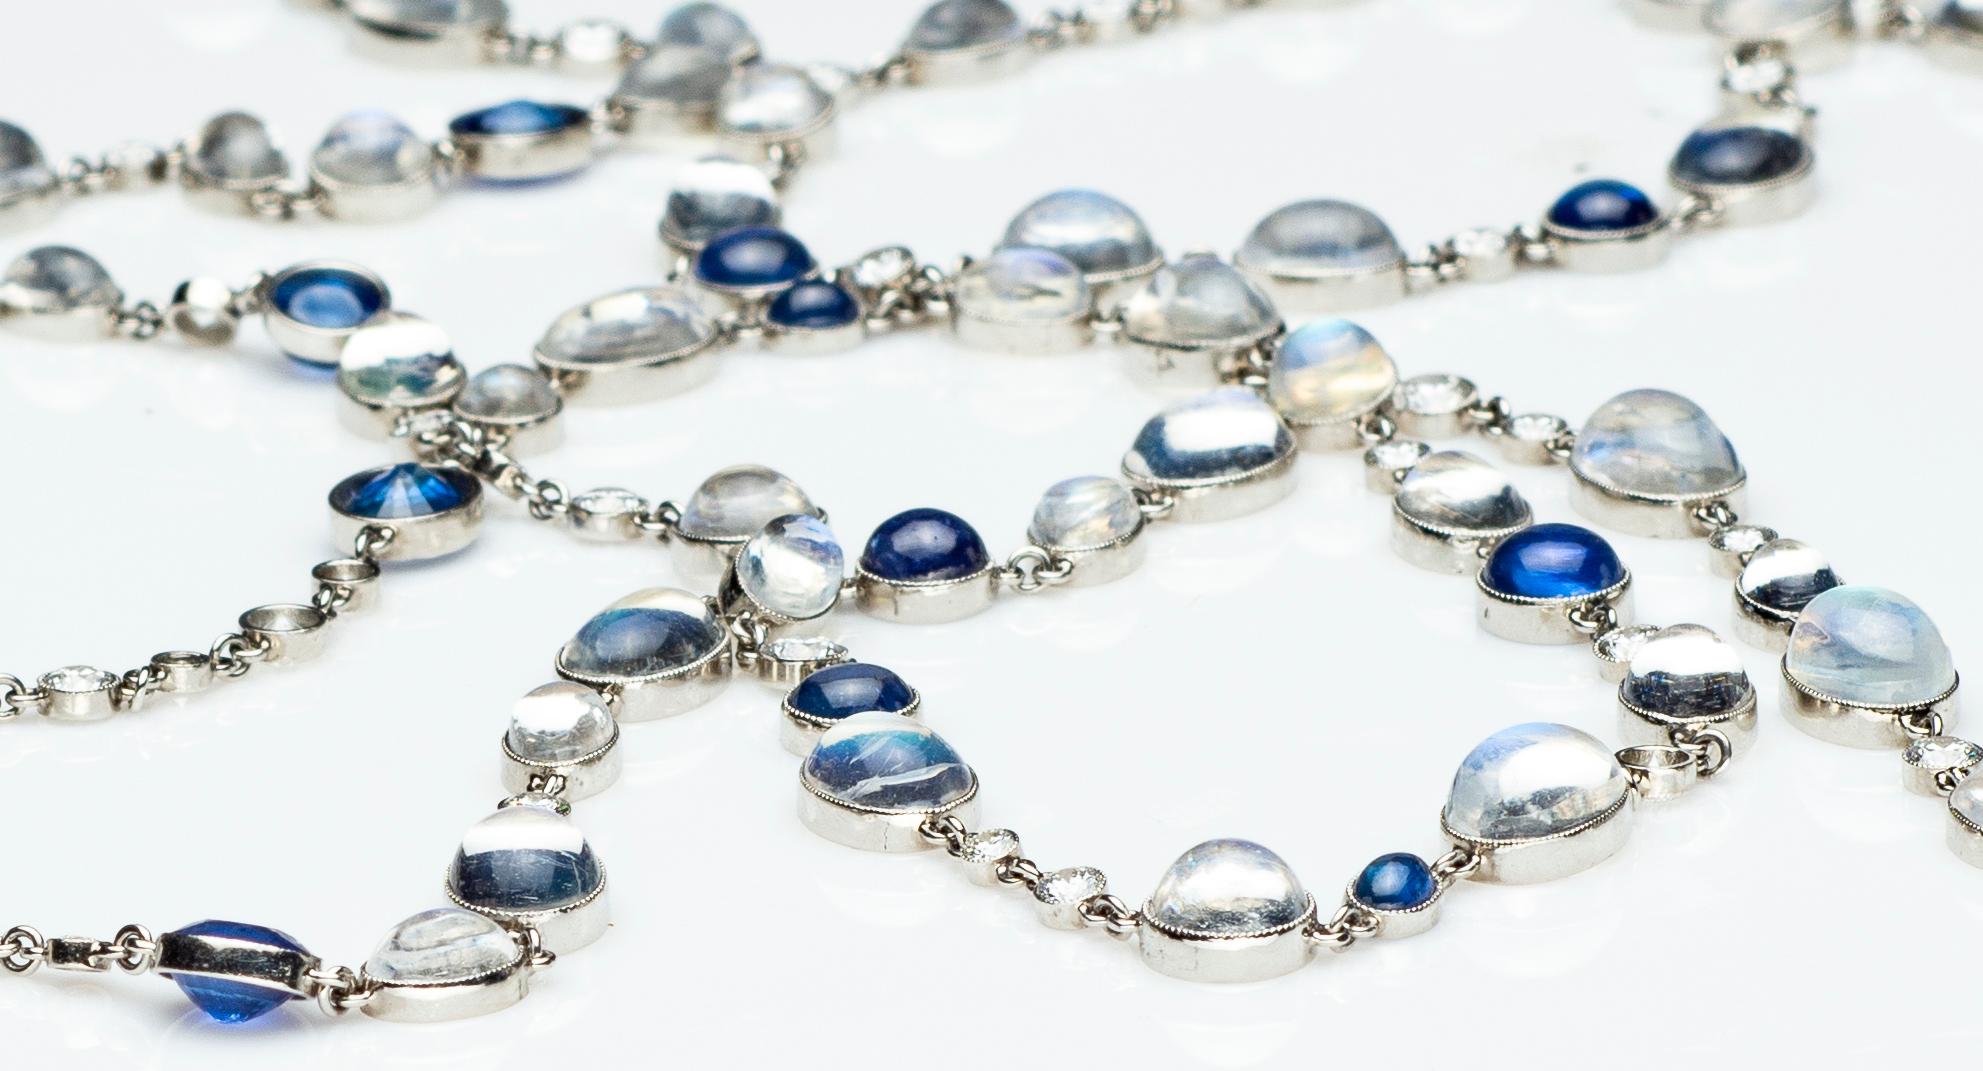 Stephen Russell Moonstone Diamond and Sapphire Chain Set in Platinum; 93 Diamonds 6.53ct; 100 Moonstones 87.92ct;  32 Sapphires 26.92ct; Length 72” 

Cabochon moonstones of exceptional adularescence are the focal point of this beautiful chain. The